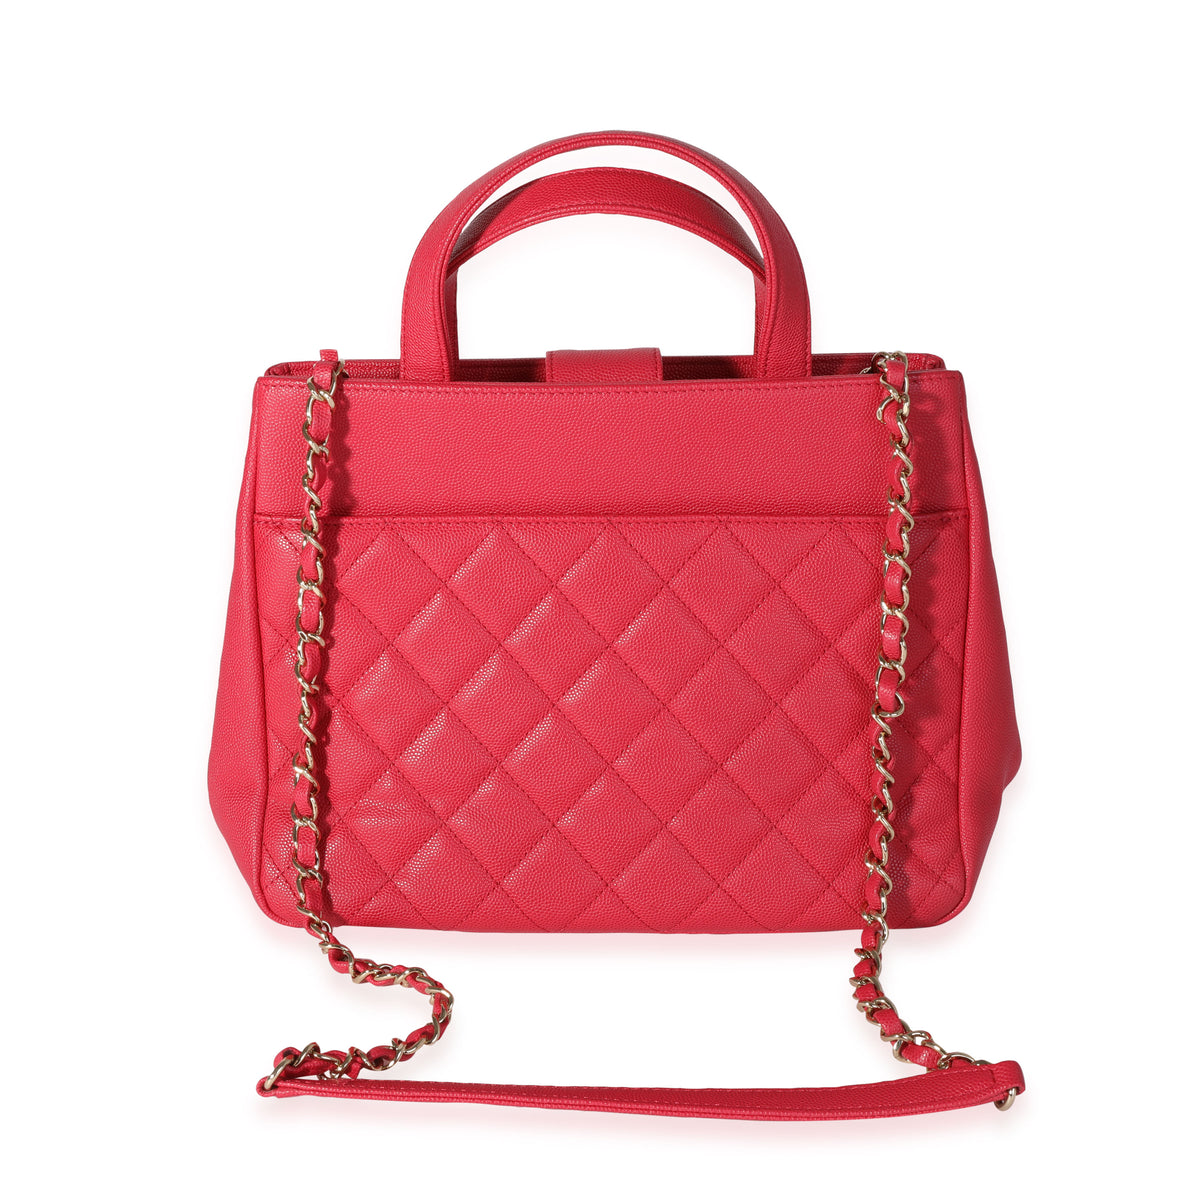 Chanel Red Caviar Leather Small Business Affinity Flap Shoulder Bag Chanel